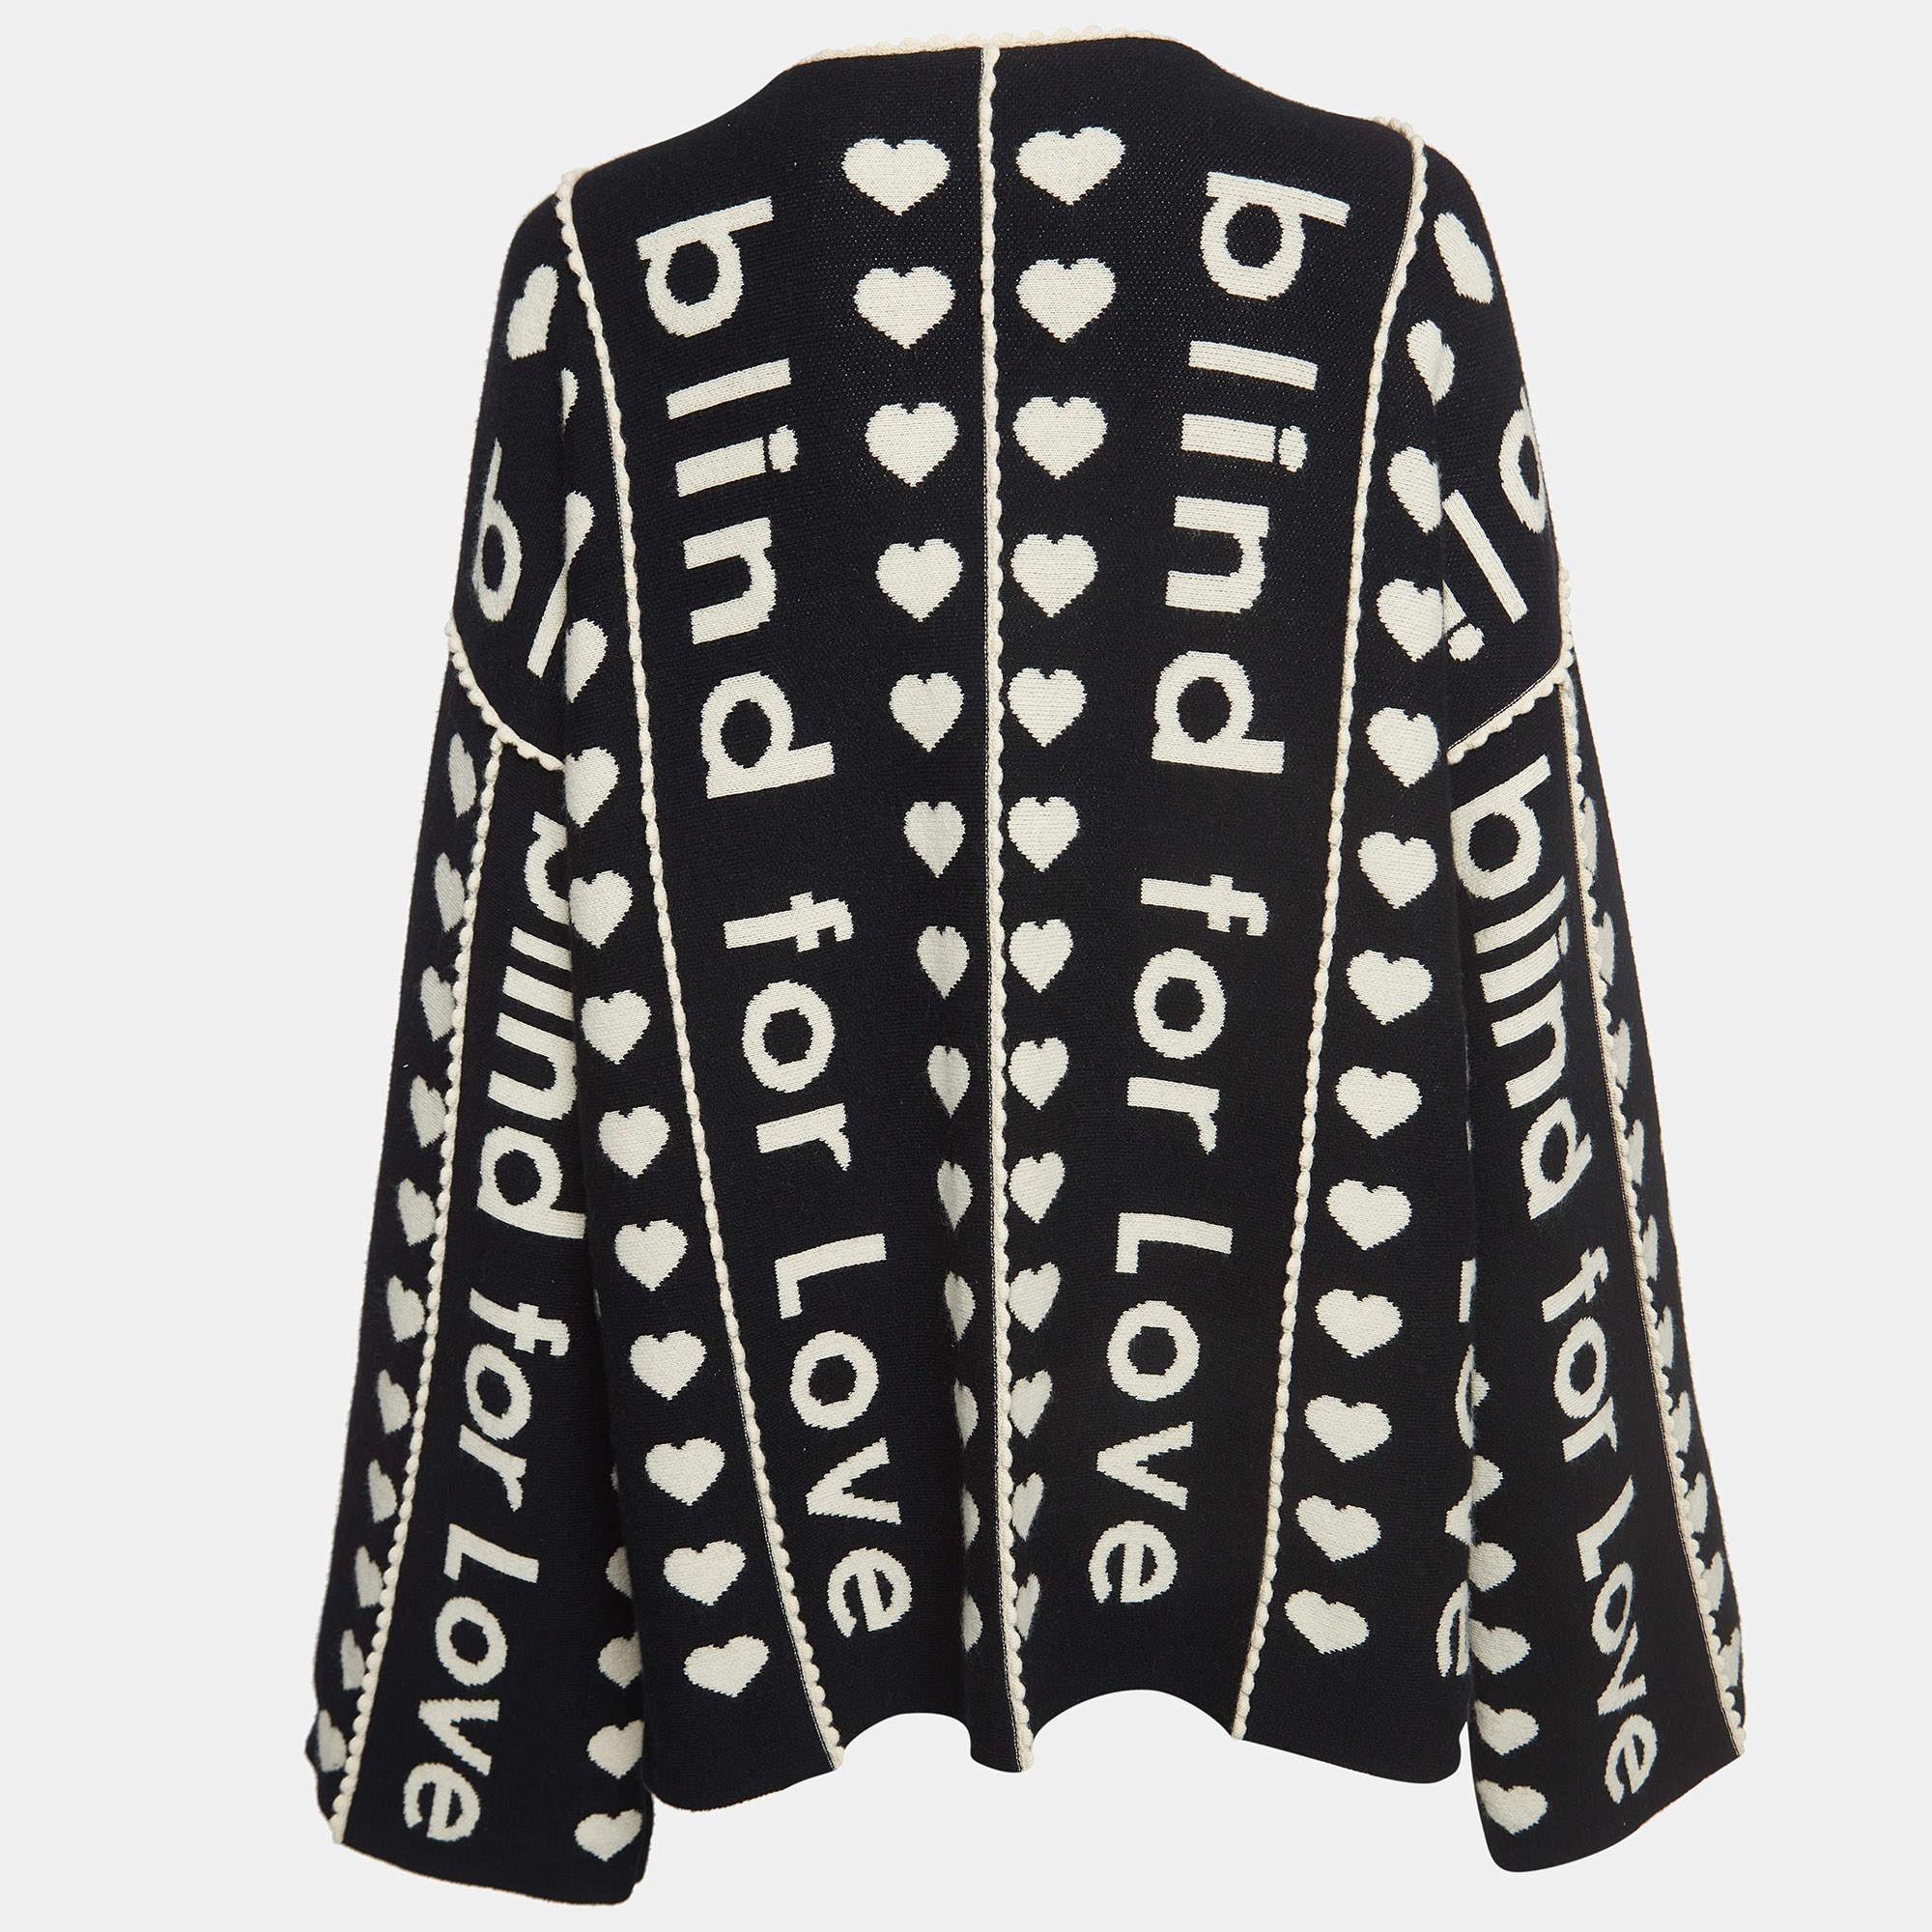 Gucci Black 'Blind for Love' Jacquard Knit Oversized Coat One Size For Sale 1